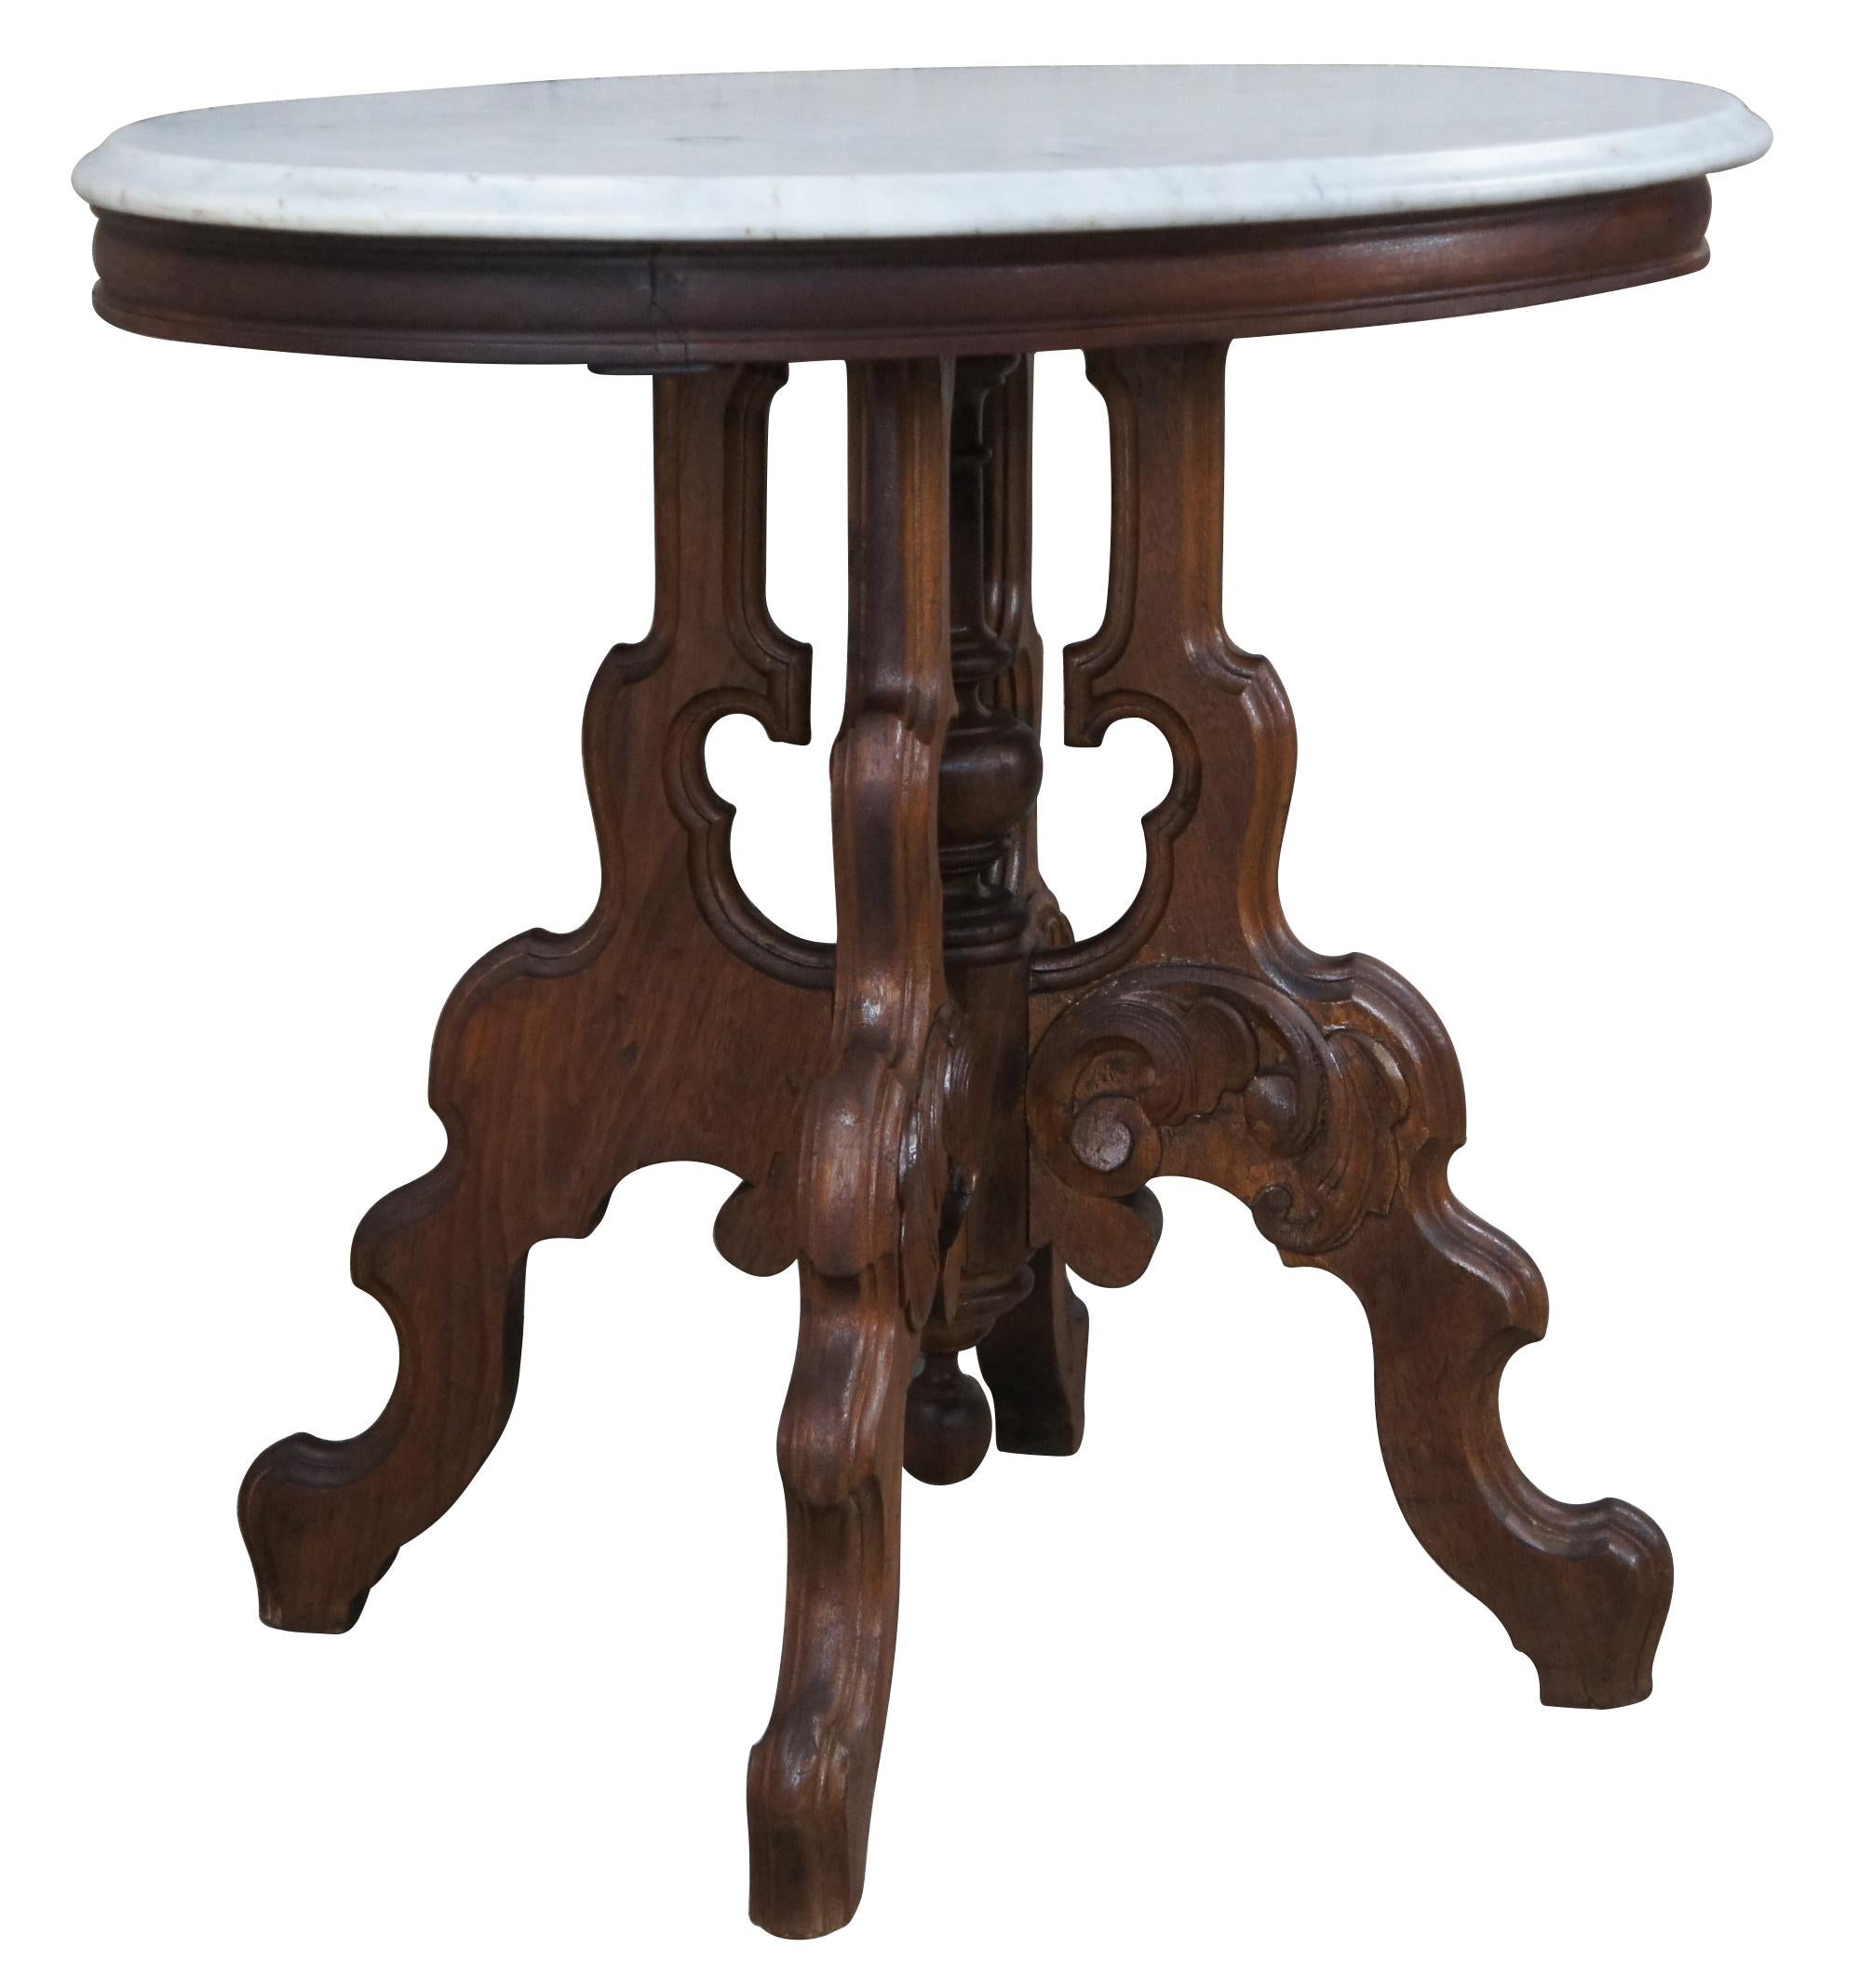 Antique Victorian Eastlake parlor table, circa 1880s. Made from walnut with an oval white marble top. Base features a turned center support surrounded by four serpentine carved legs with floral applied carvings and round down finial.